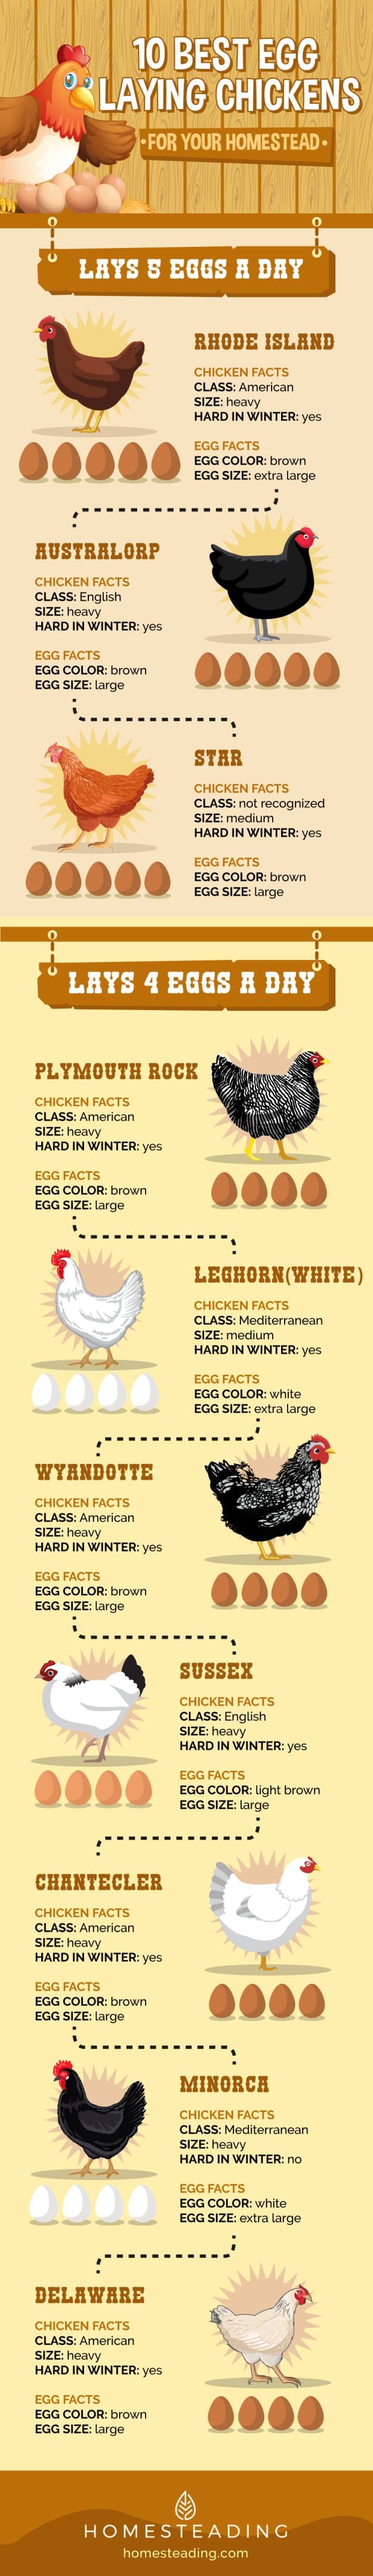 10 Best Egg Laying Chickens Infographic